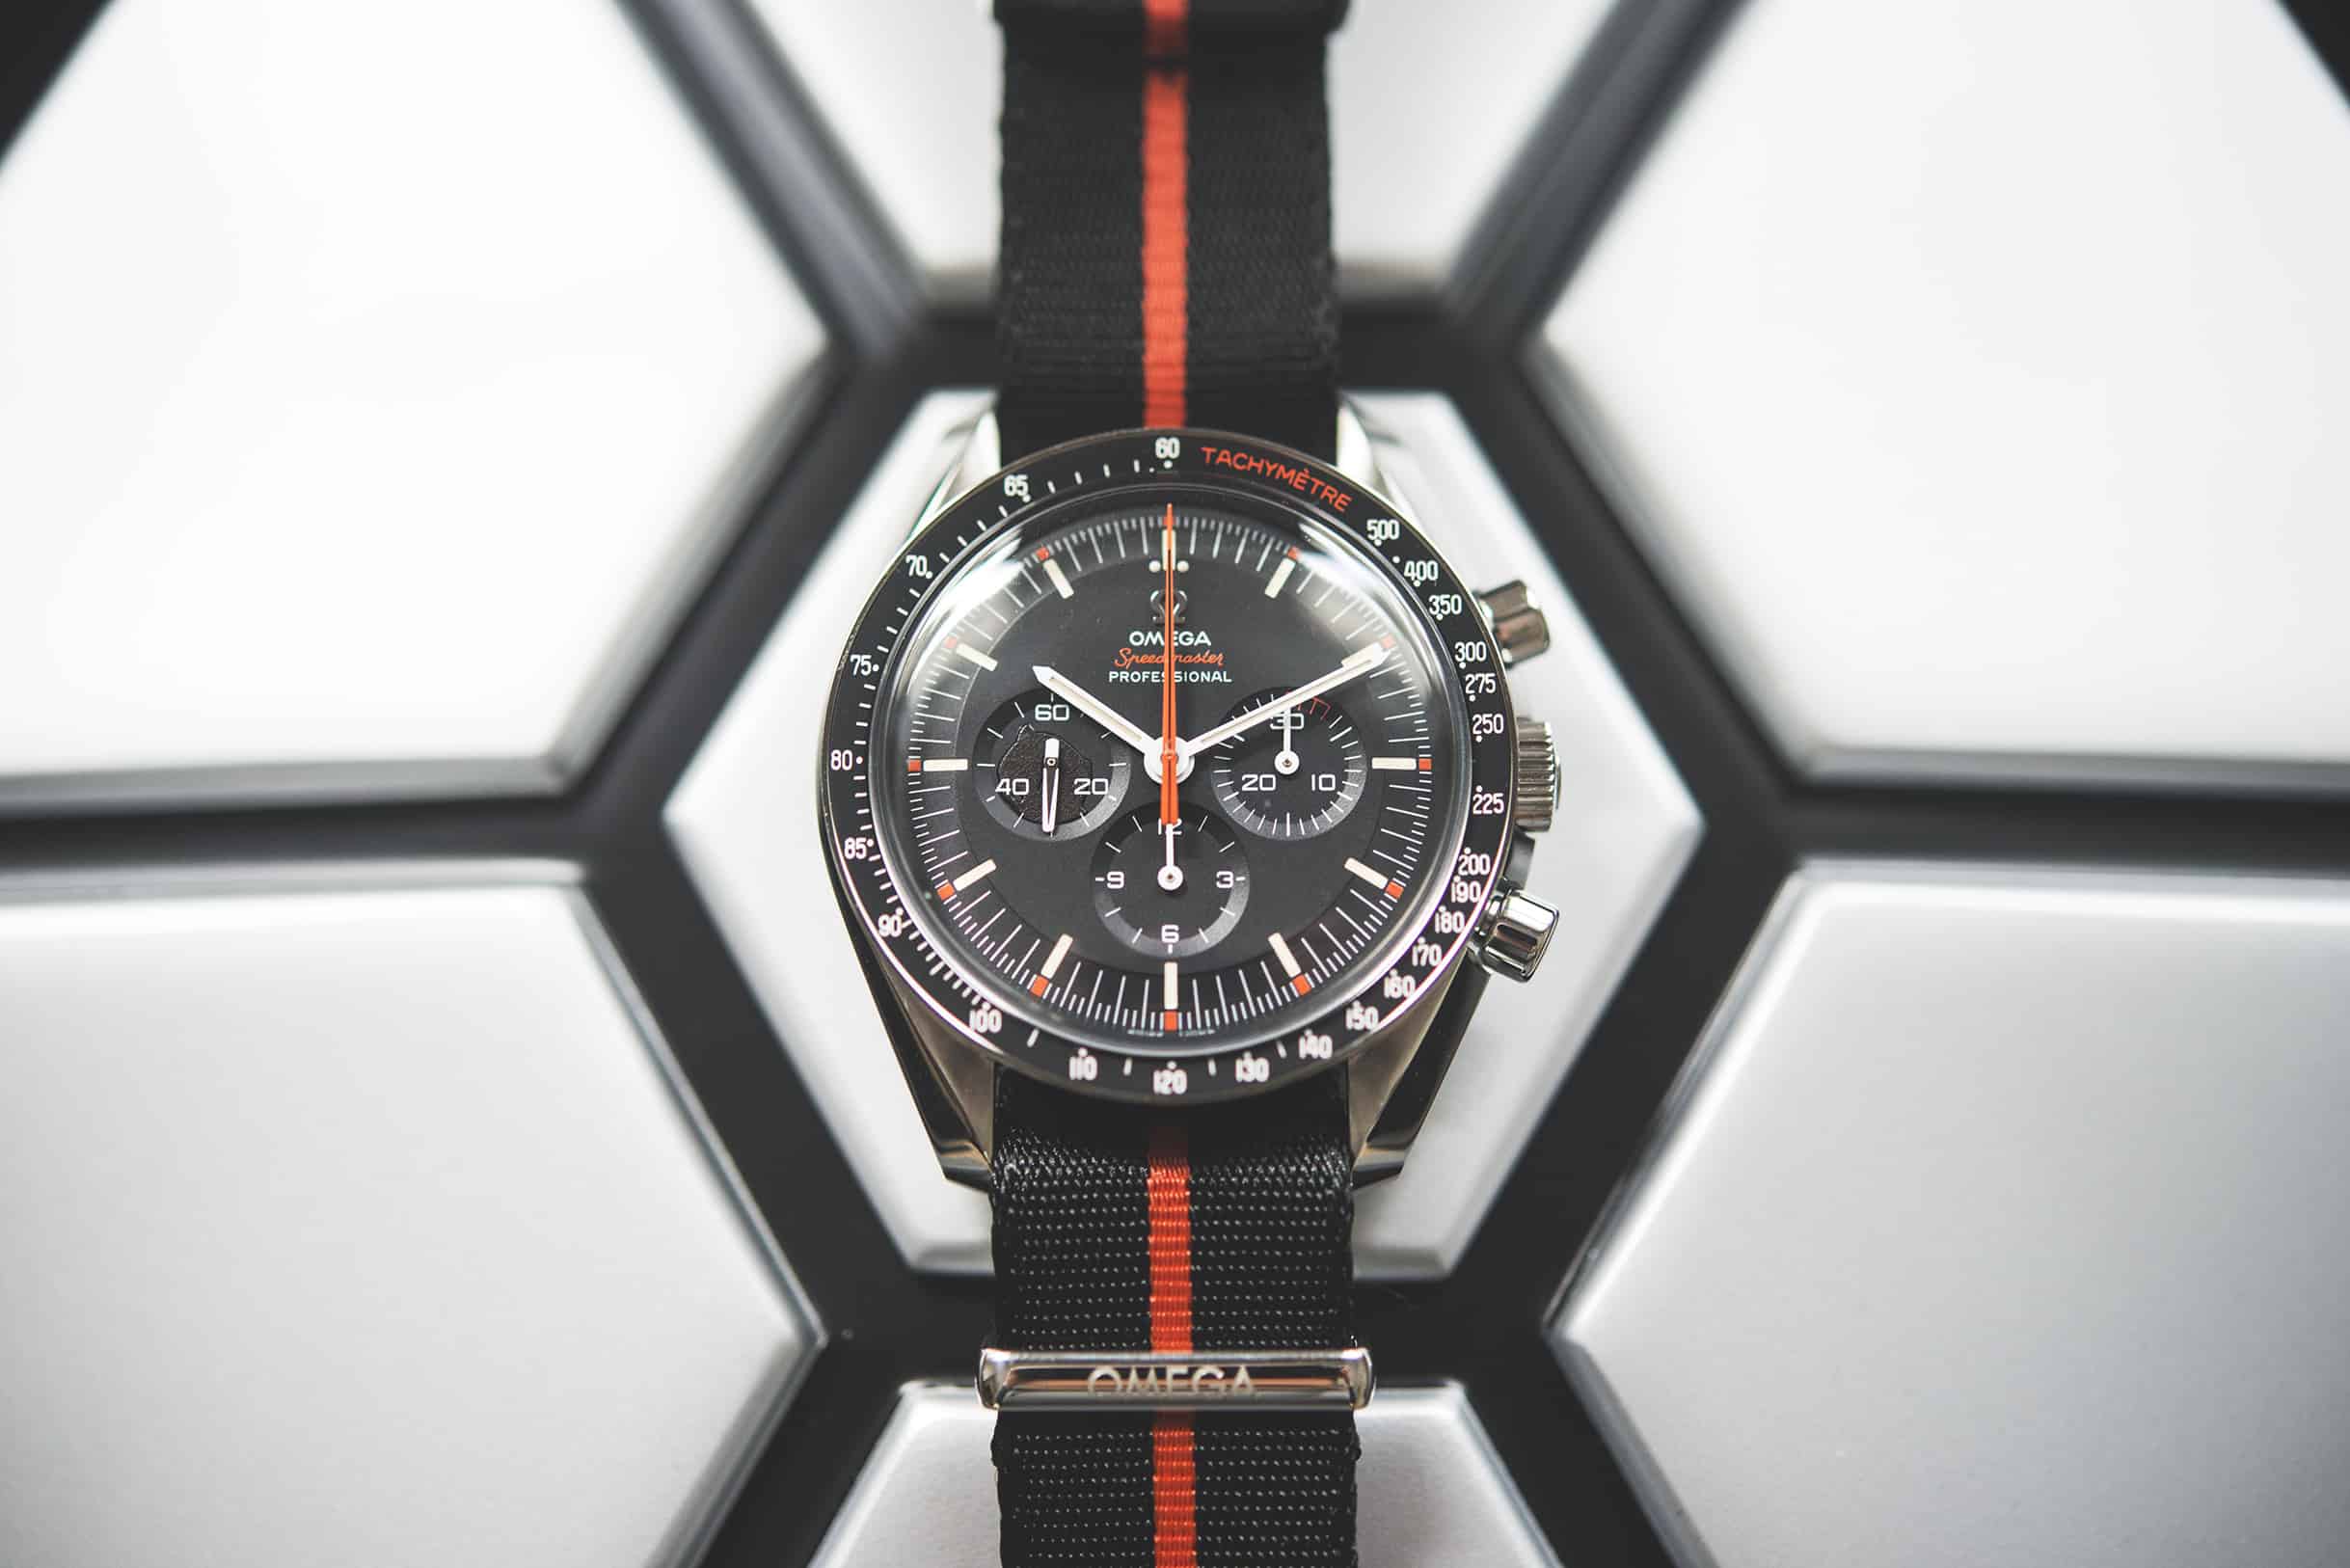 Get the Omega Speedy Tuesday “Ultraman” for $2,012